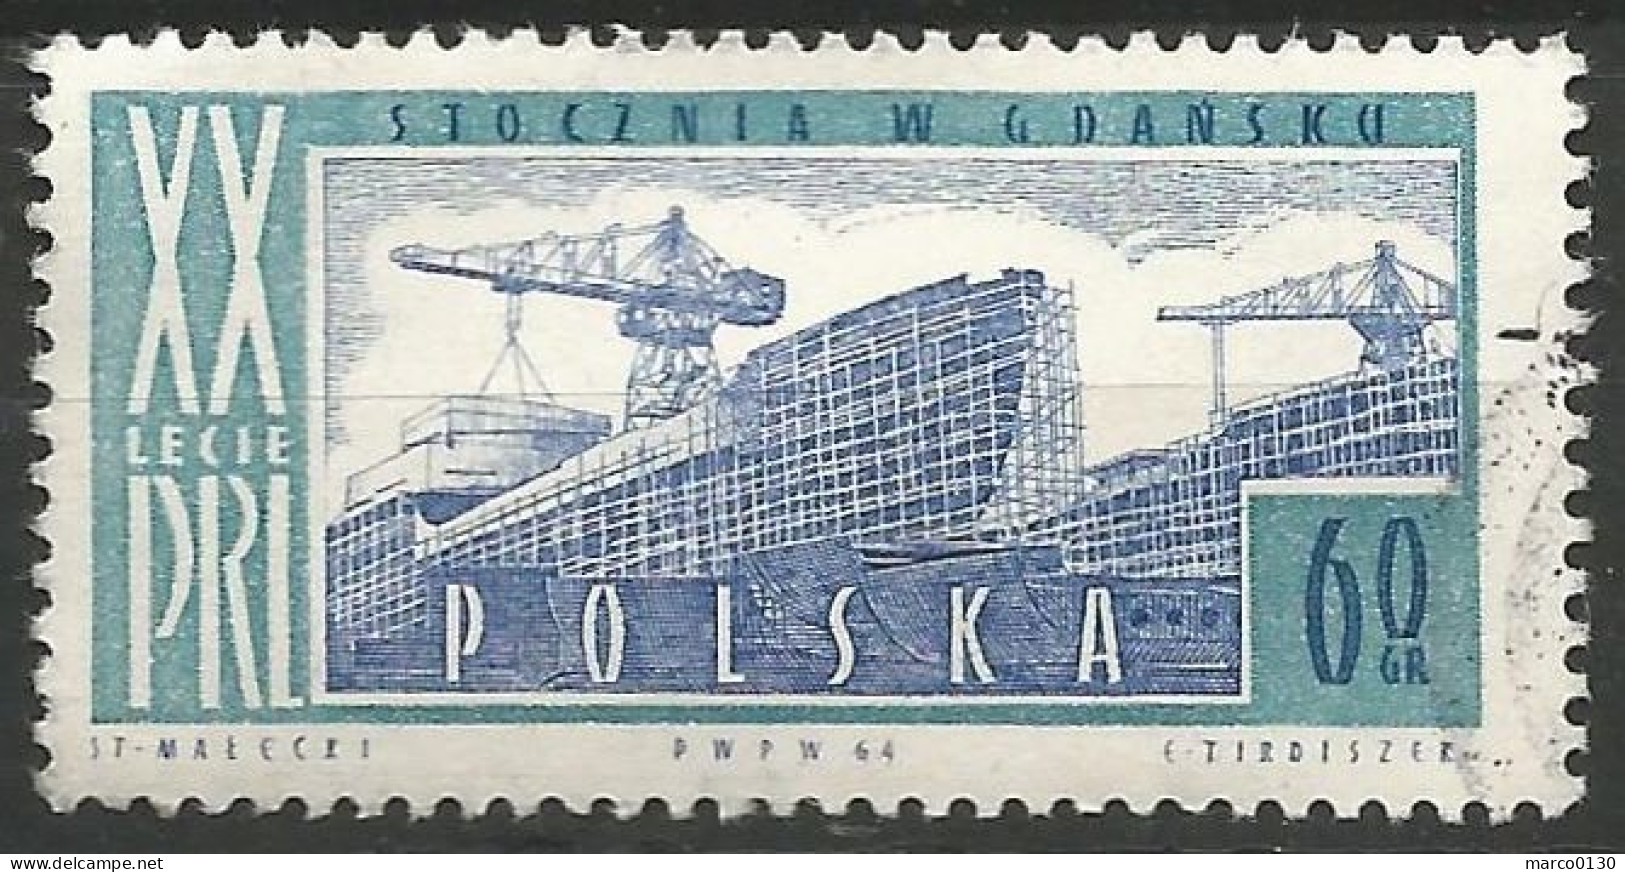 POLOGNE N° 1365 OBLITERE - Used Stamps